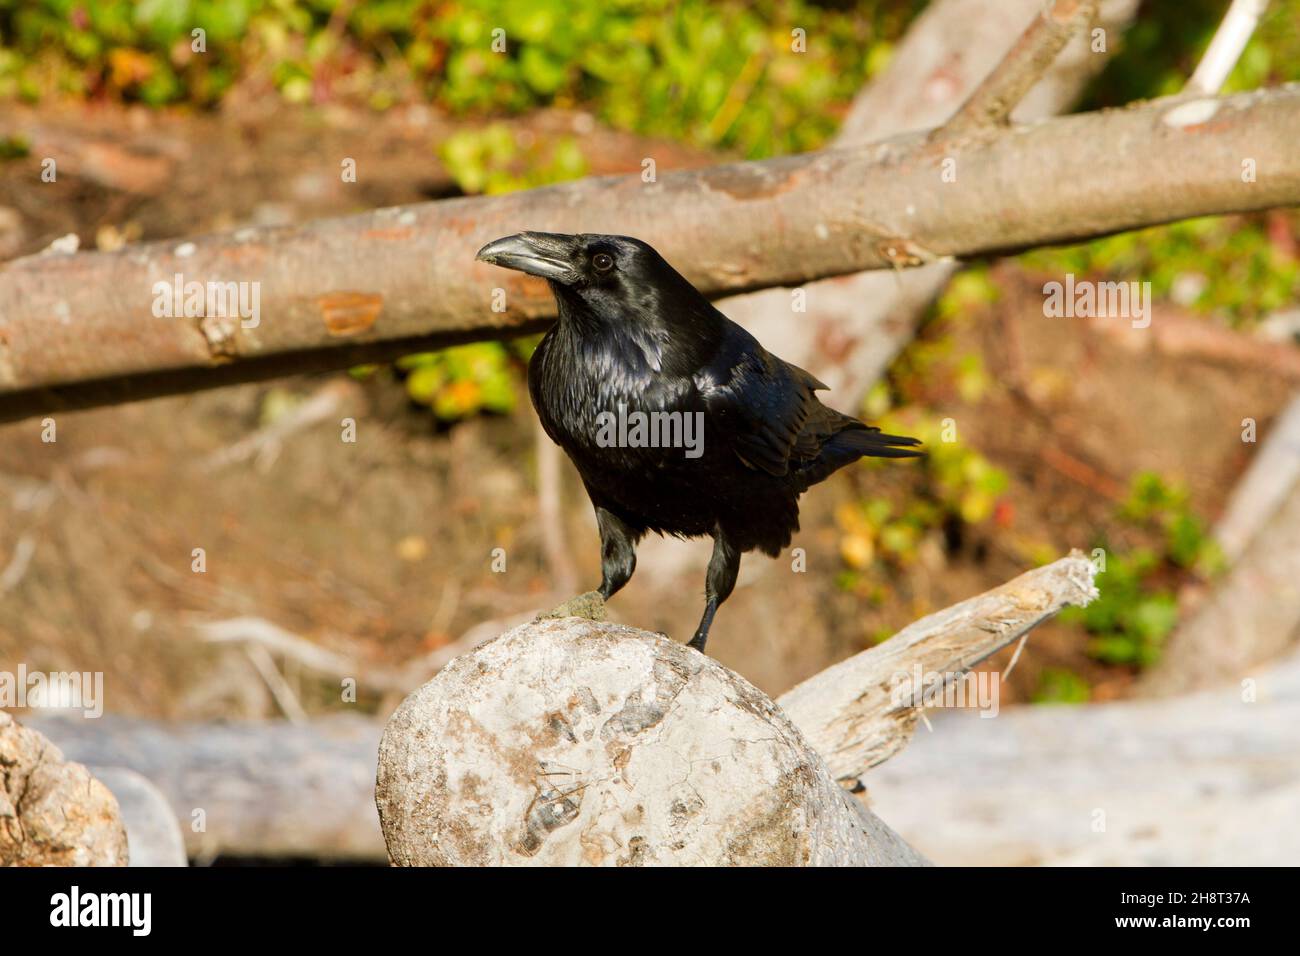 Common Raven (Corvus corax) perched on a log at Wickaninnish beach on west coast Vancouver Island, BC, Canada in October Stock Photo